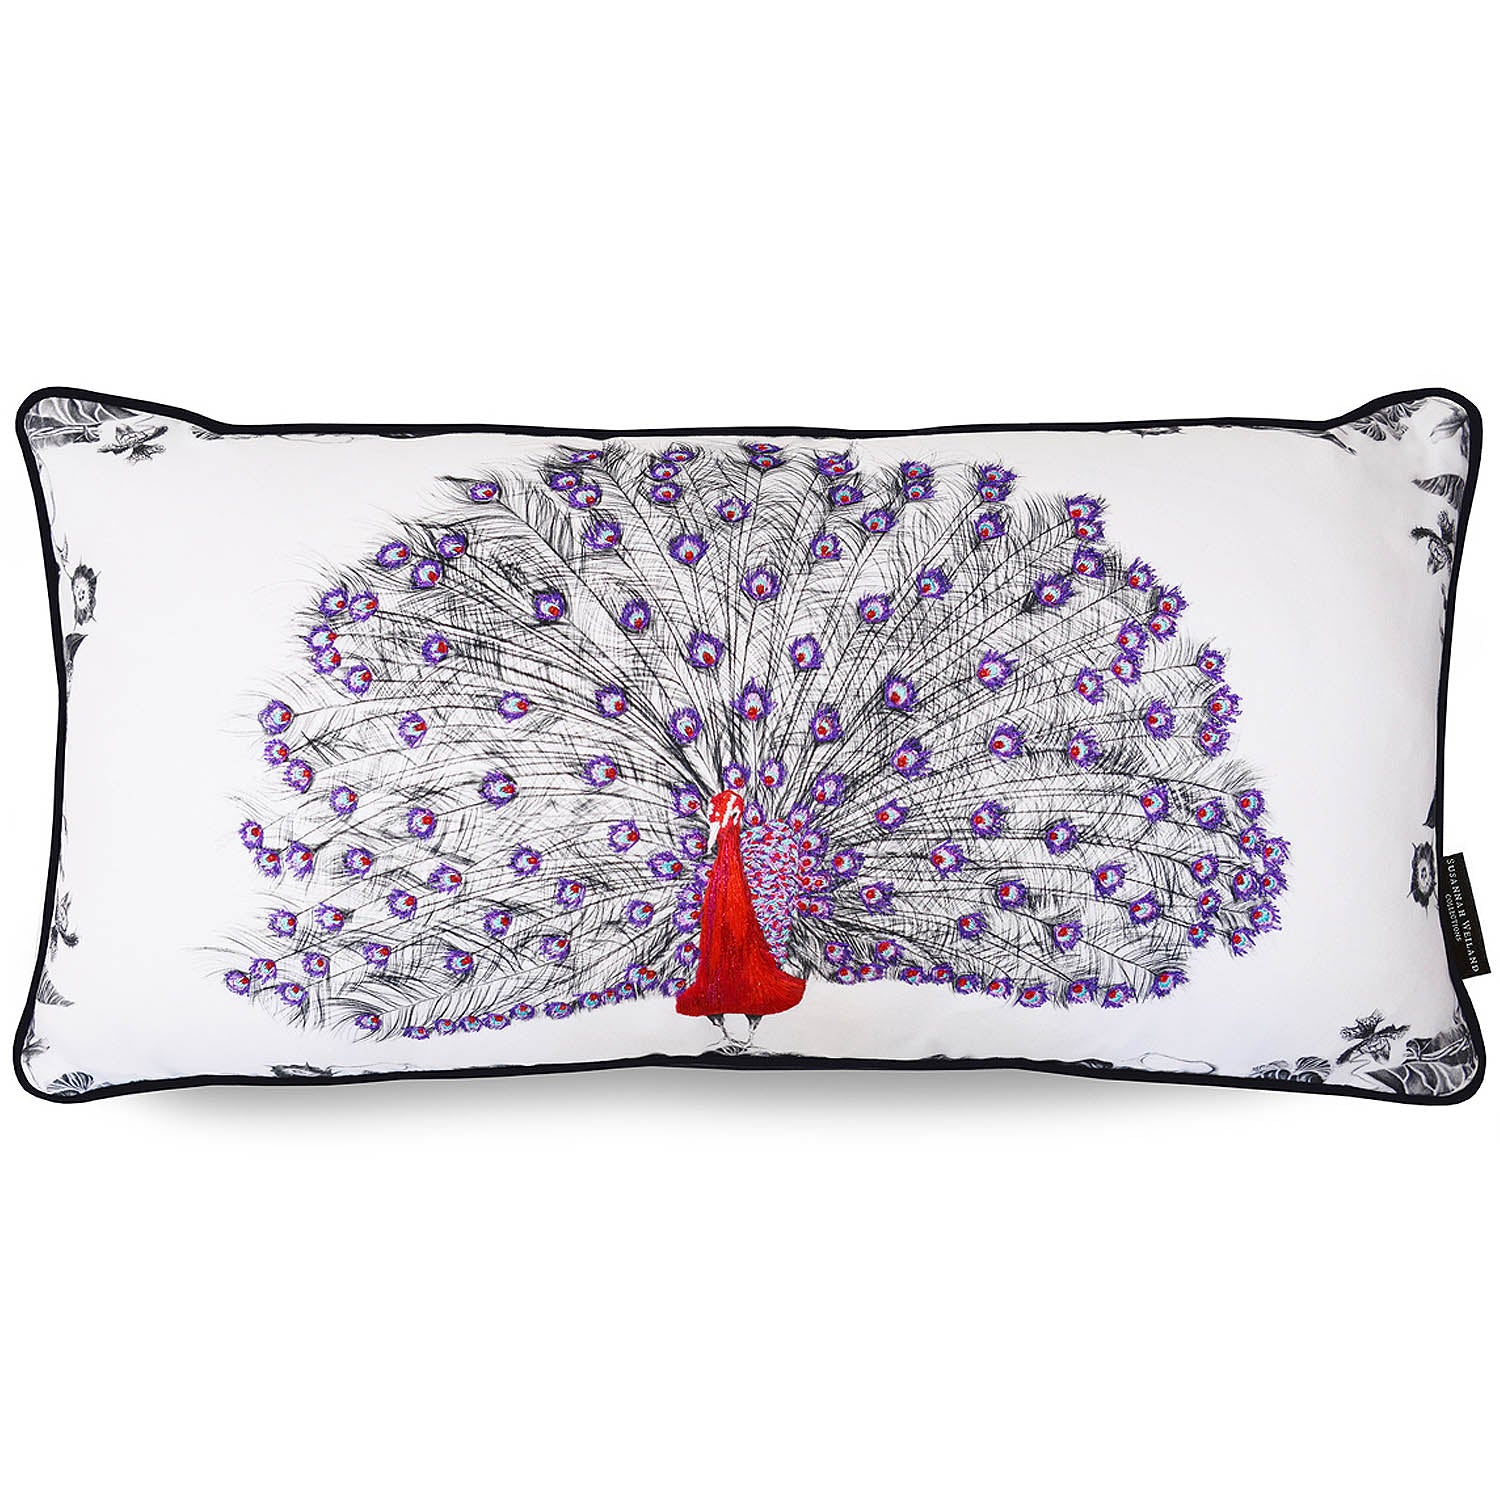 Peacock cushion with red and purple hand embroidered detail and seed beads